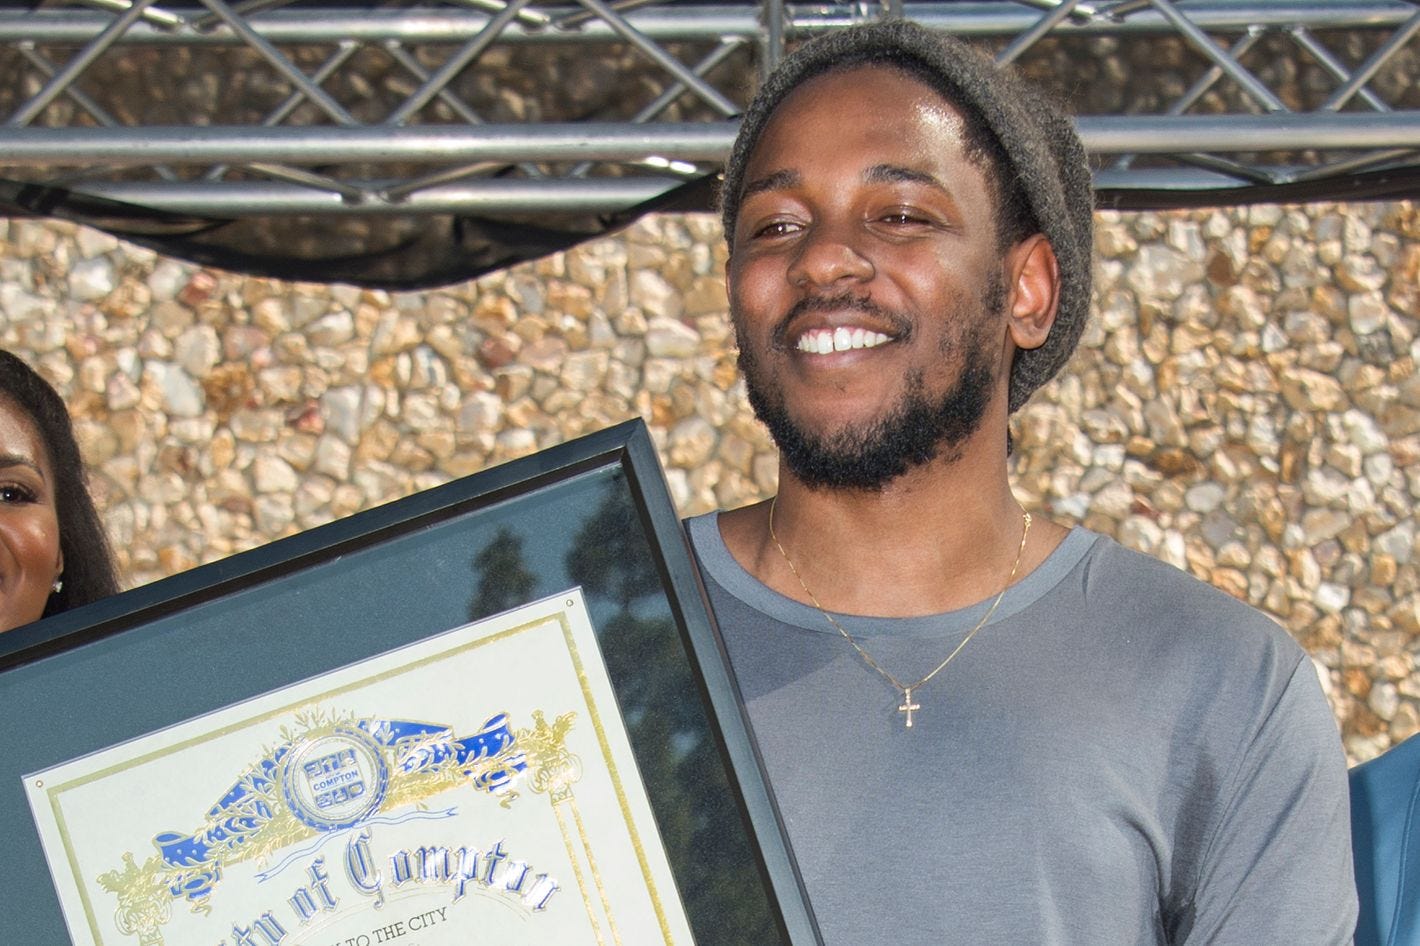 Kendrick Lamar Receives the Key to the City of Compton